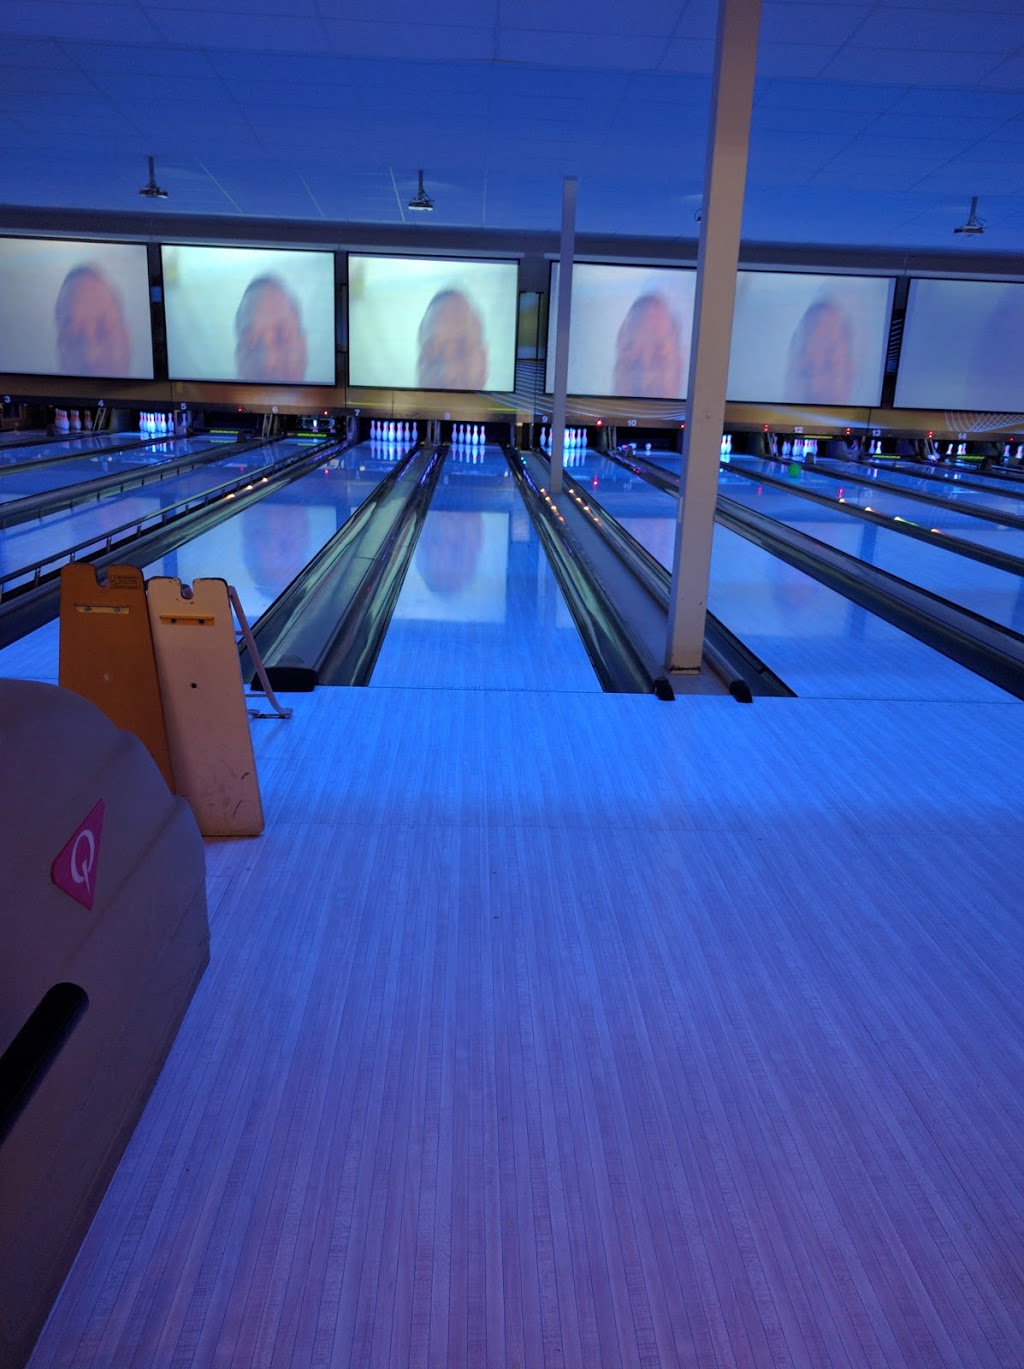 ZONE BOWLING Villawood | bowling alley | 850 Woodville Rd, Villawood NSW 2163, Australia | 1300368067 OR +61 1300 368 067